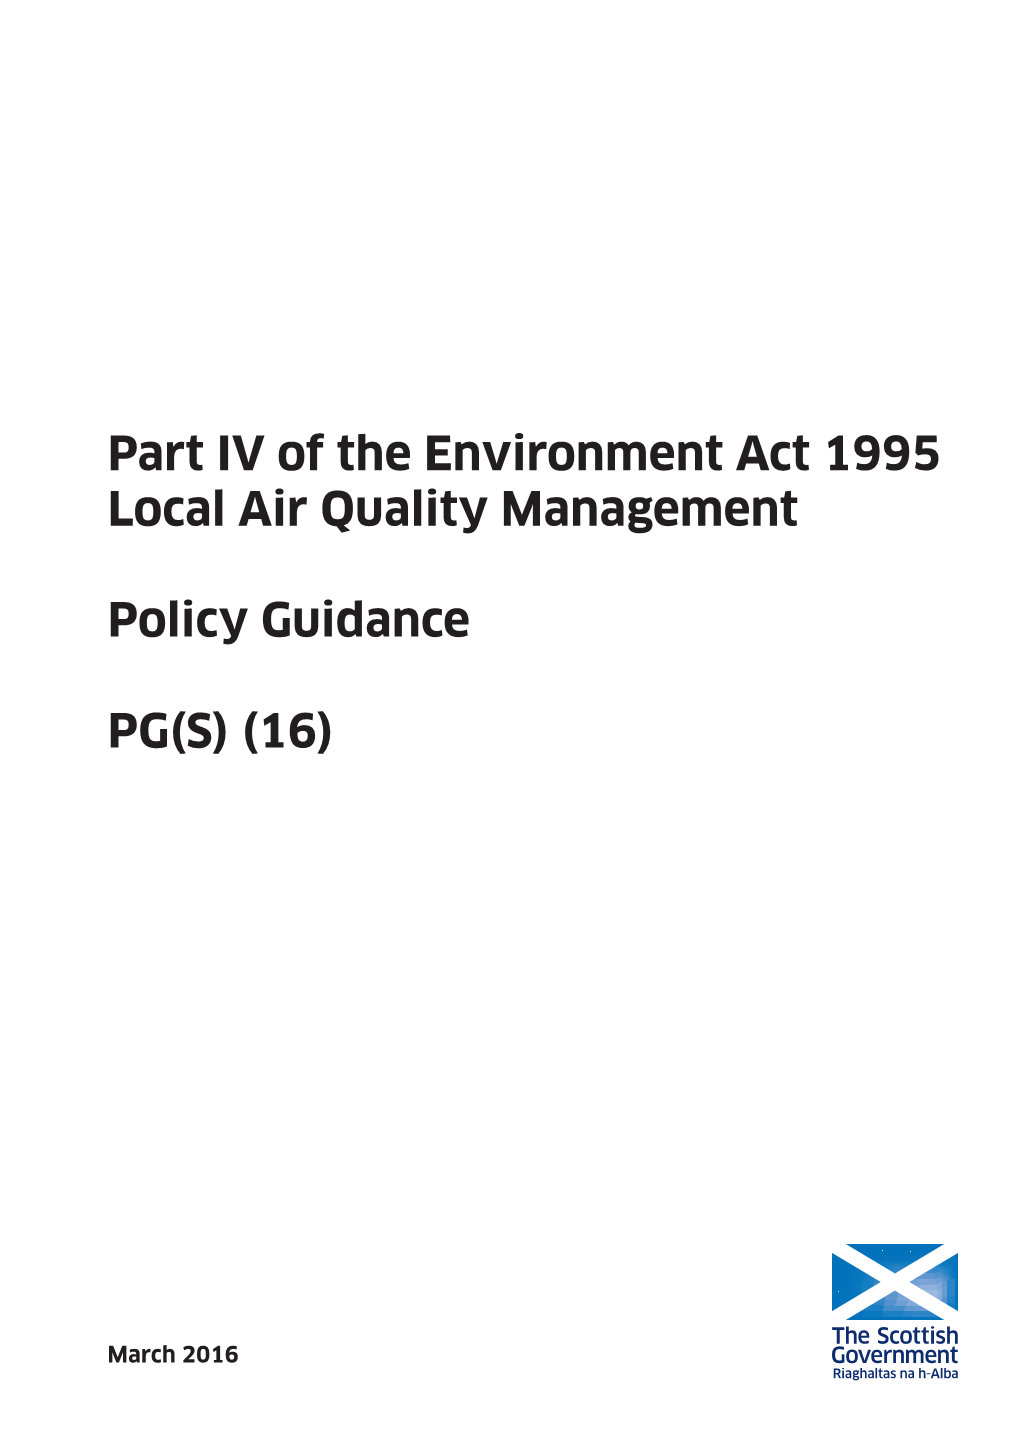 Part IV of the Environment Act 1995 Local Air Quality Management